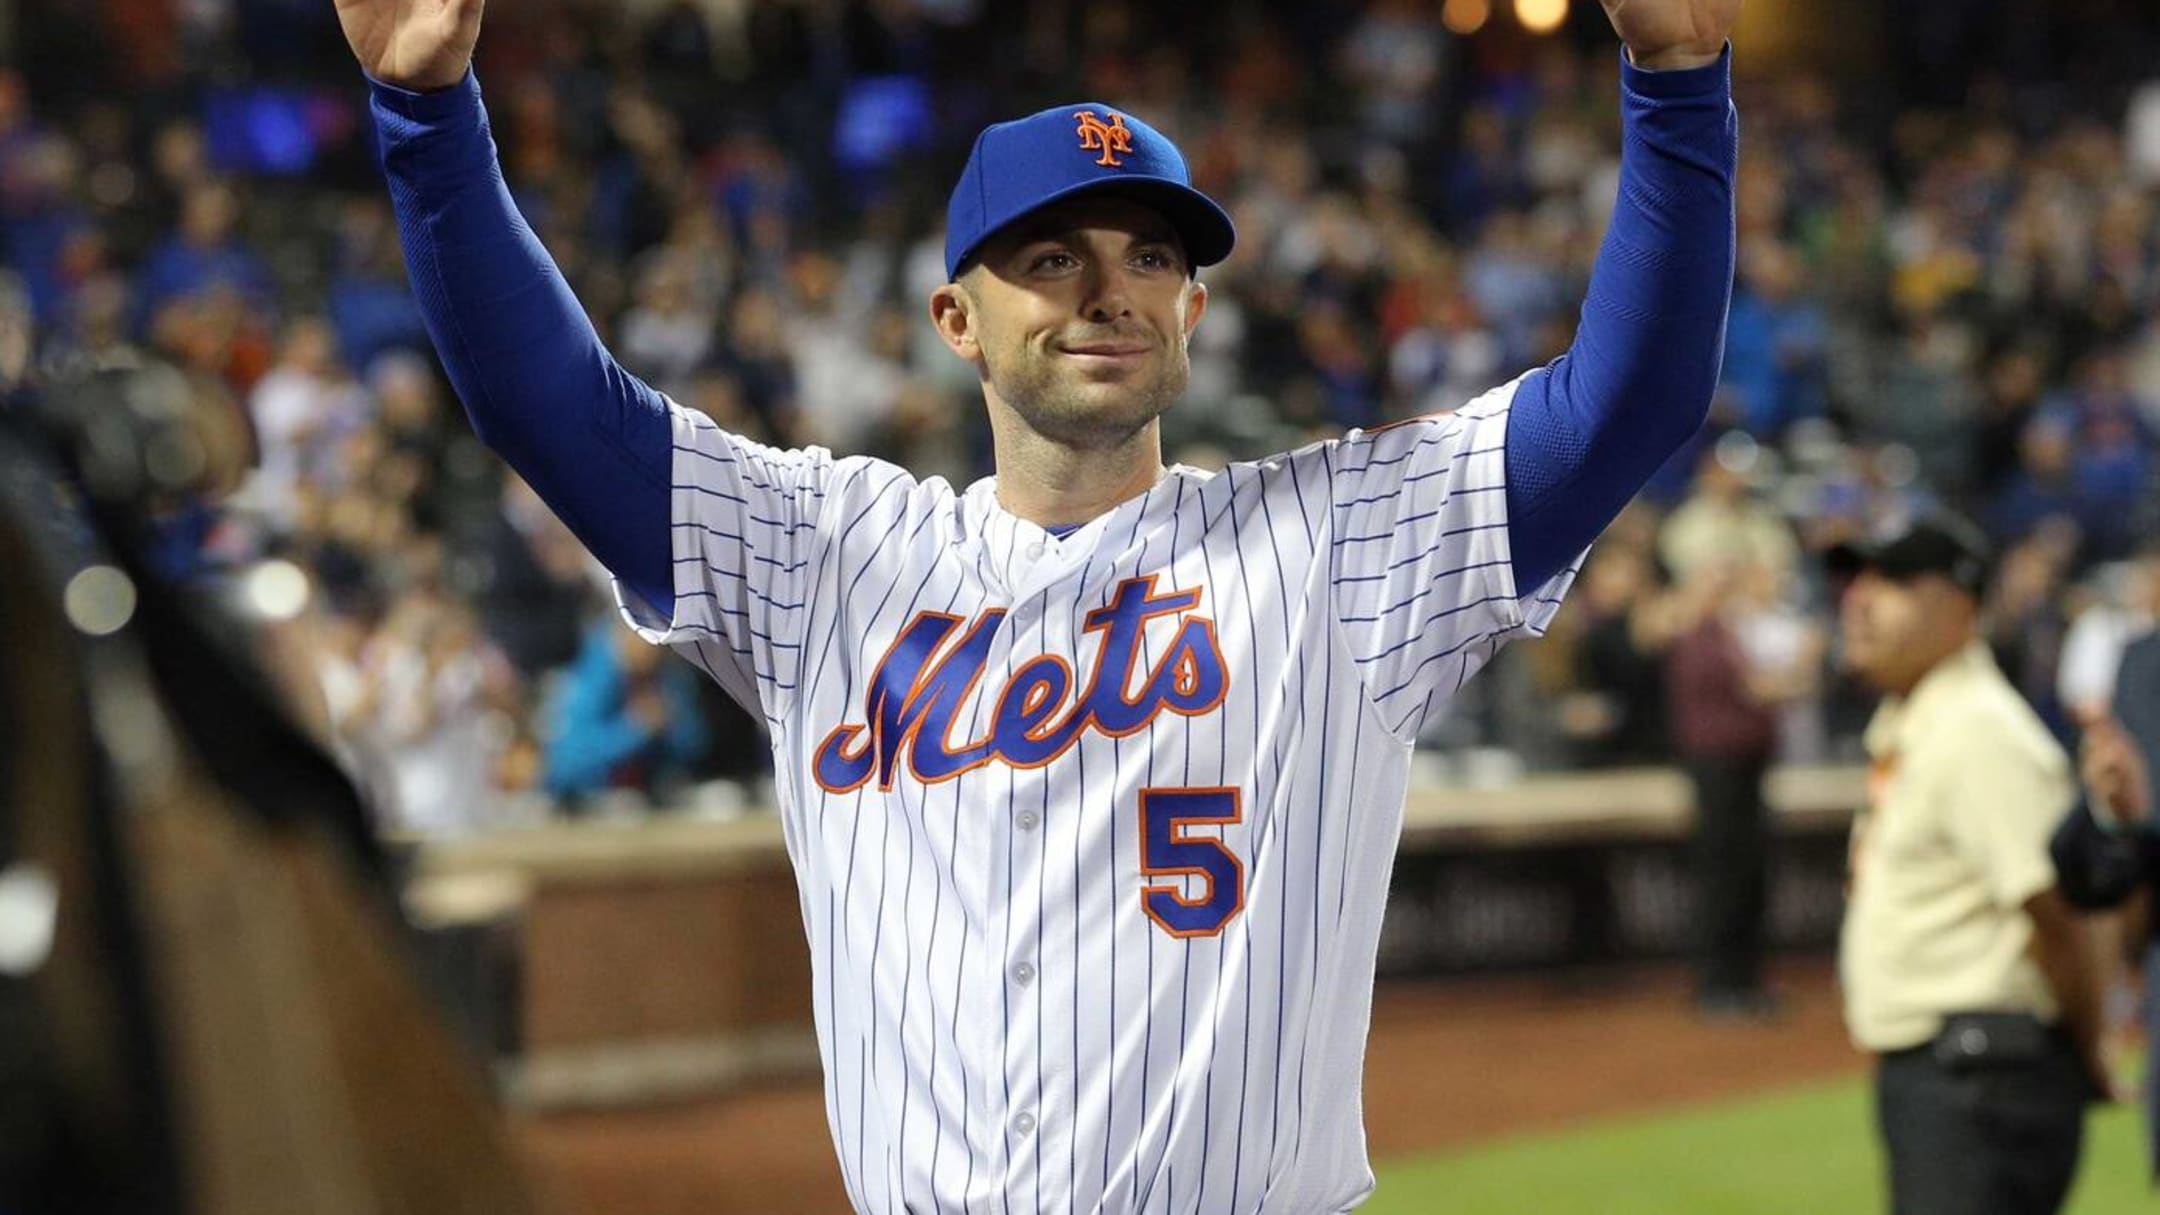 David Wright love the los mets Jersey